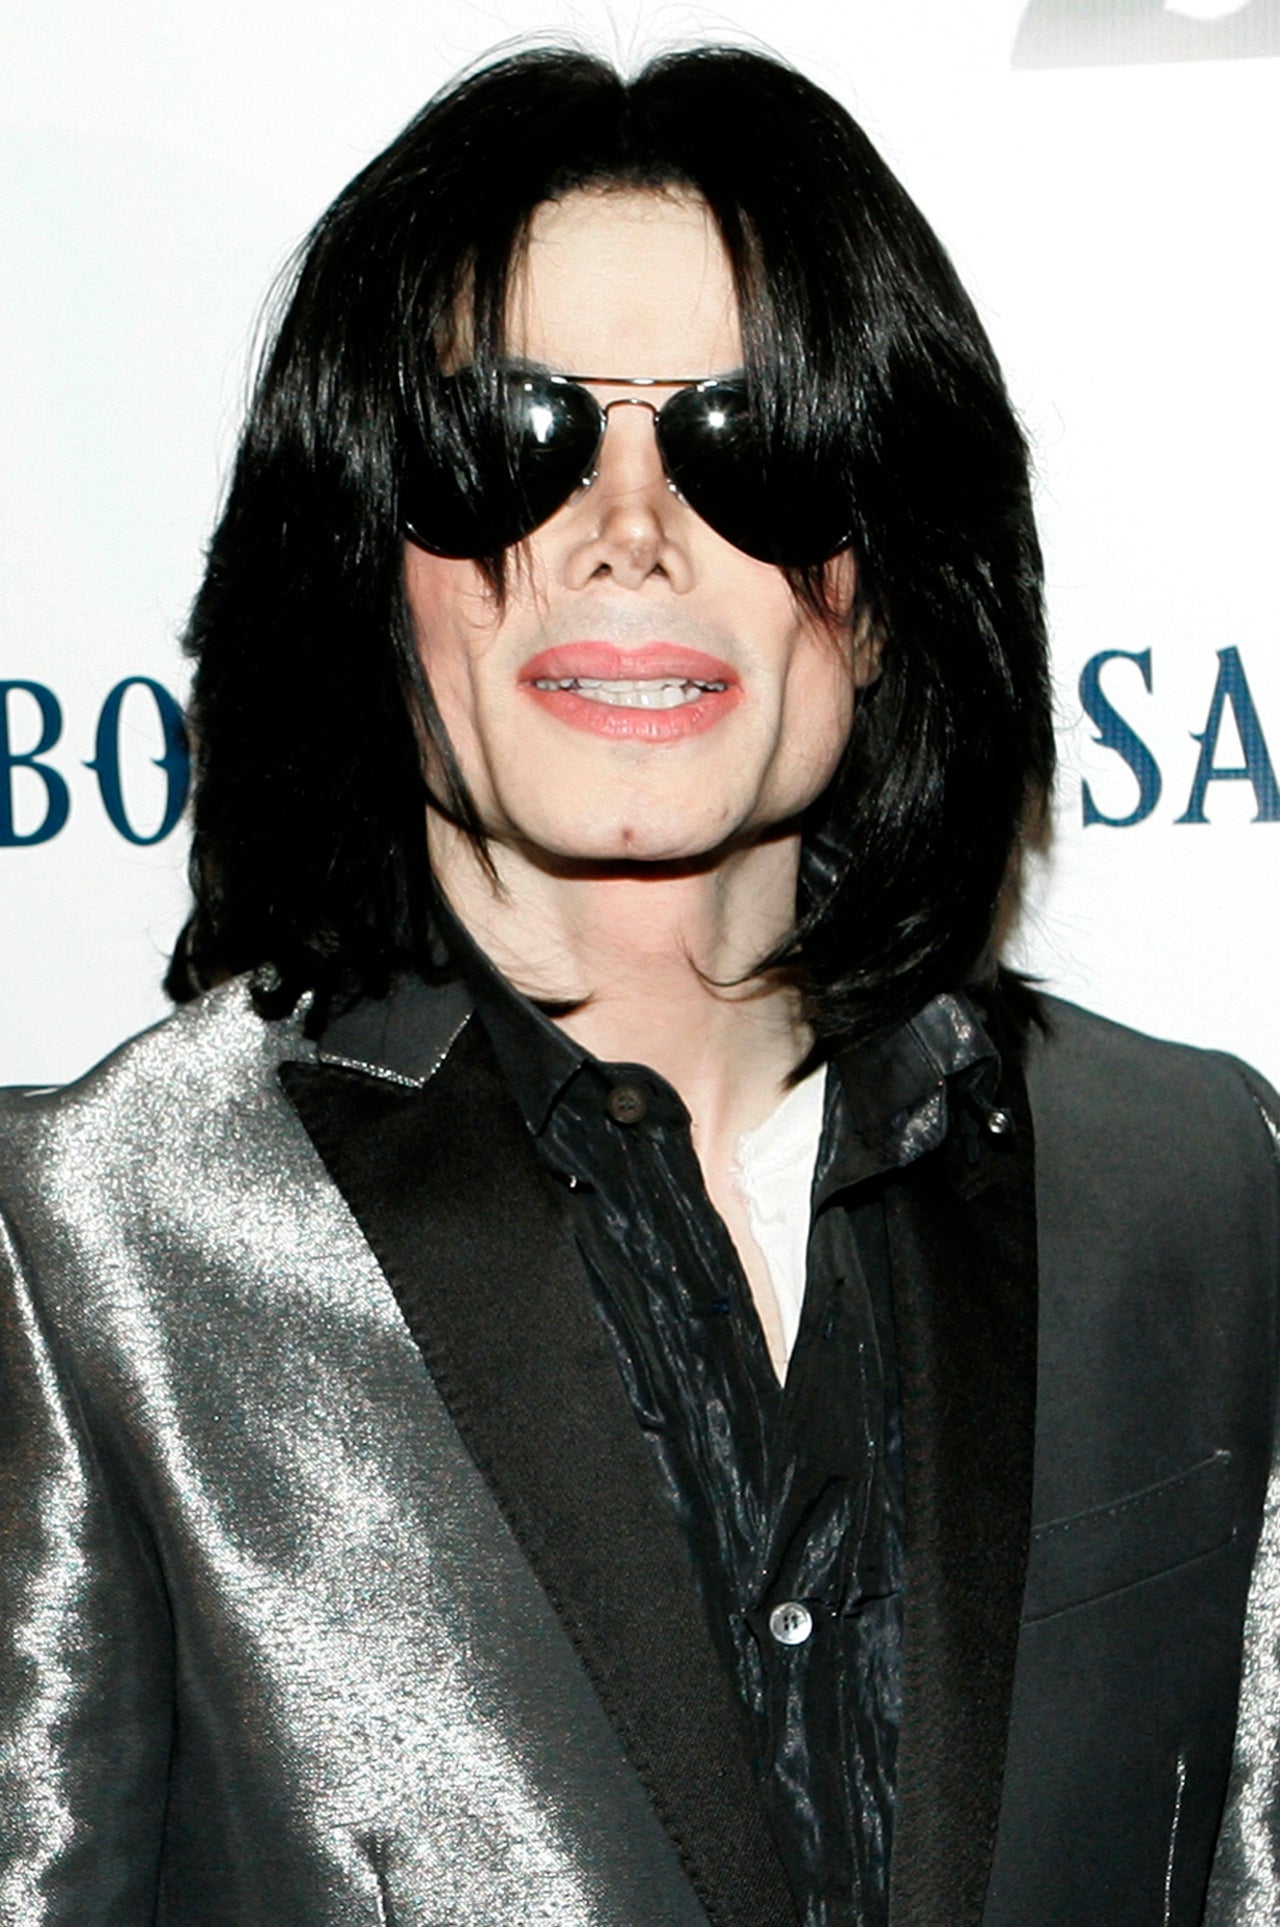 Michael Jackson Album: New Songs Coming in May